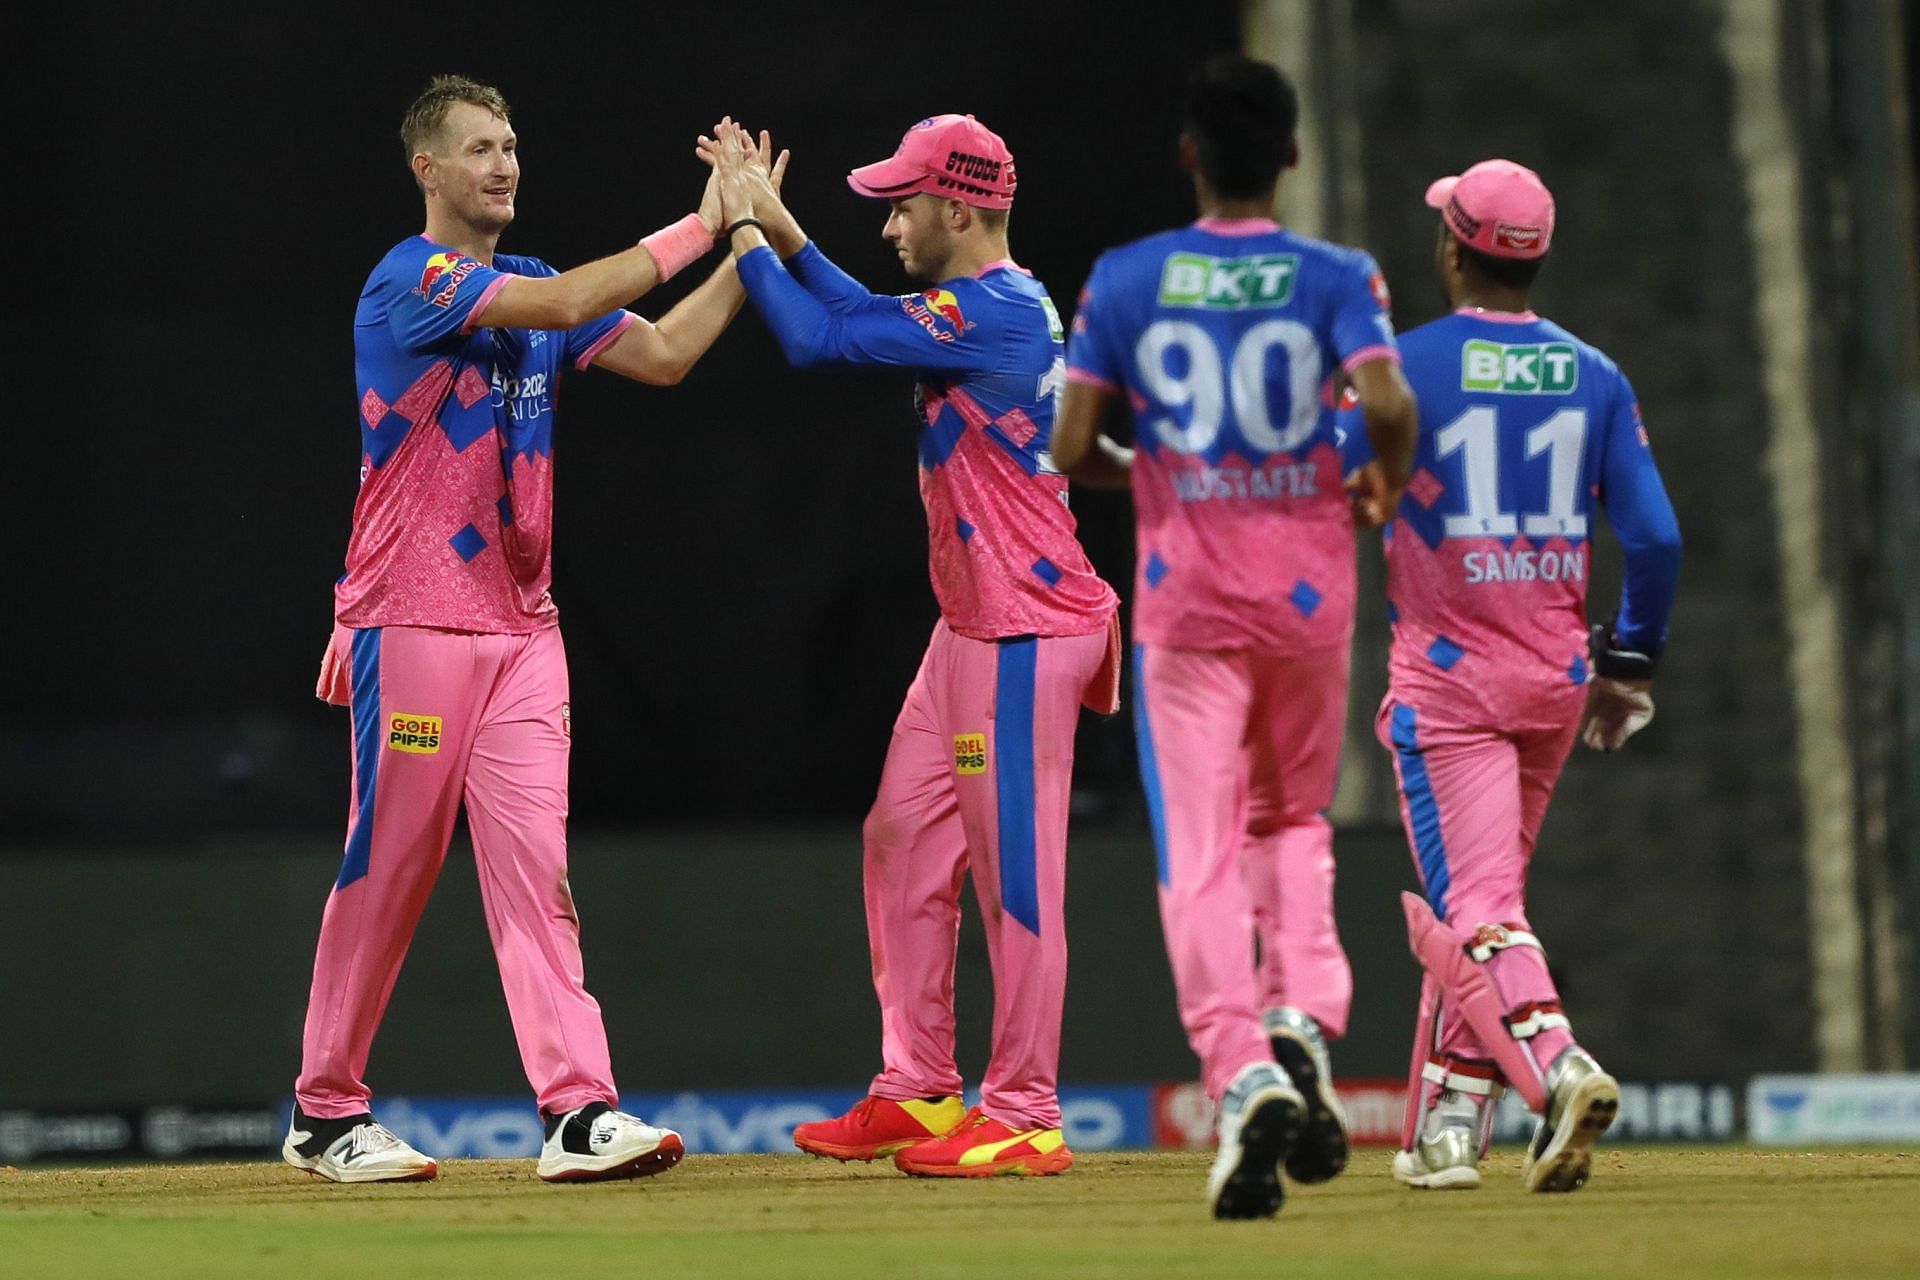 Rajasthan Royals will enter the auction with a purse of INR 62 crore